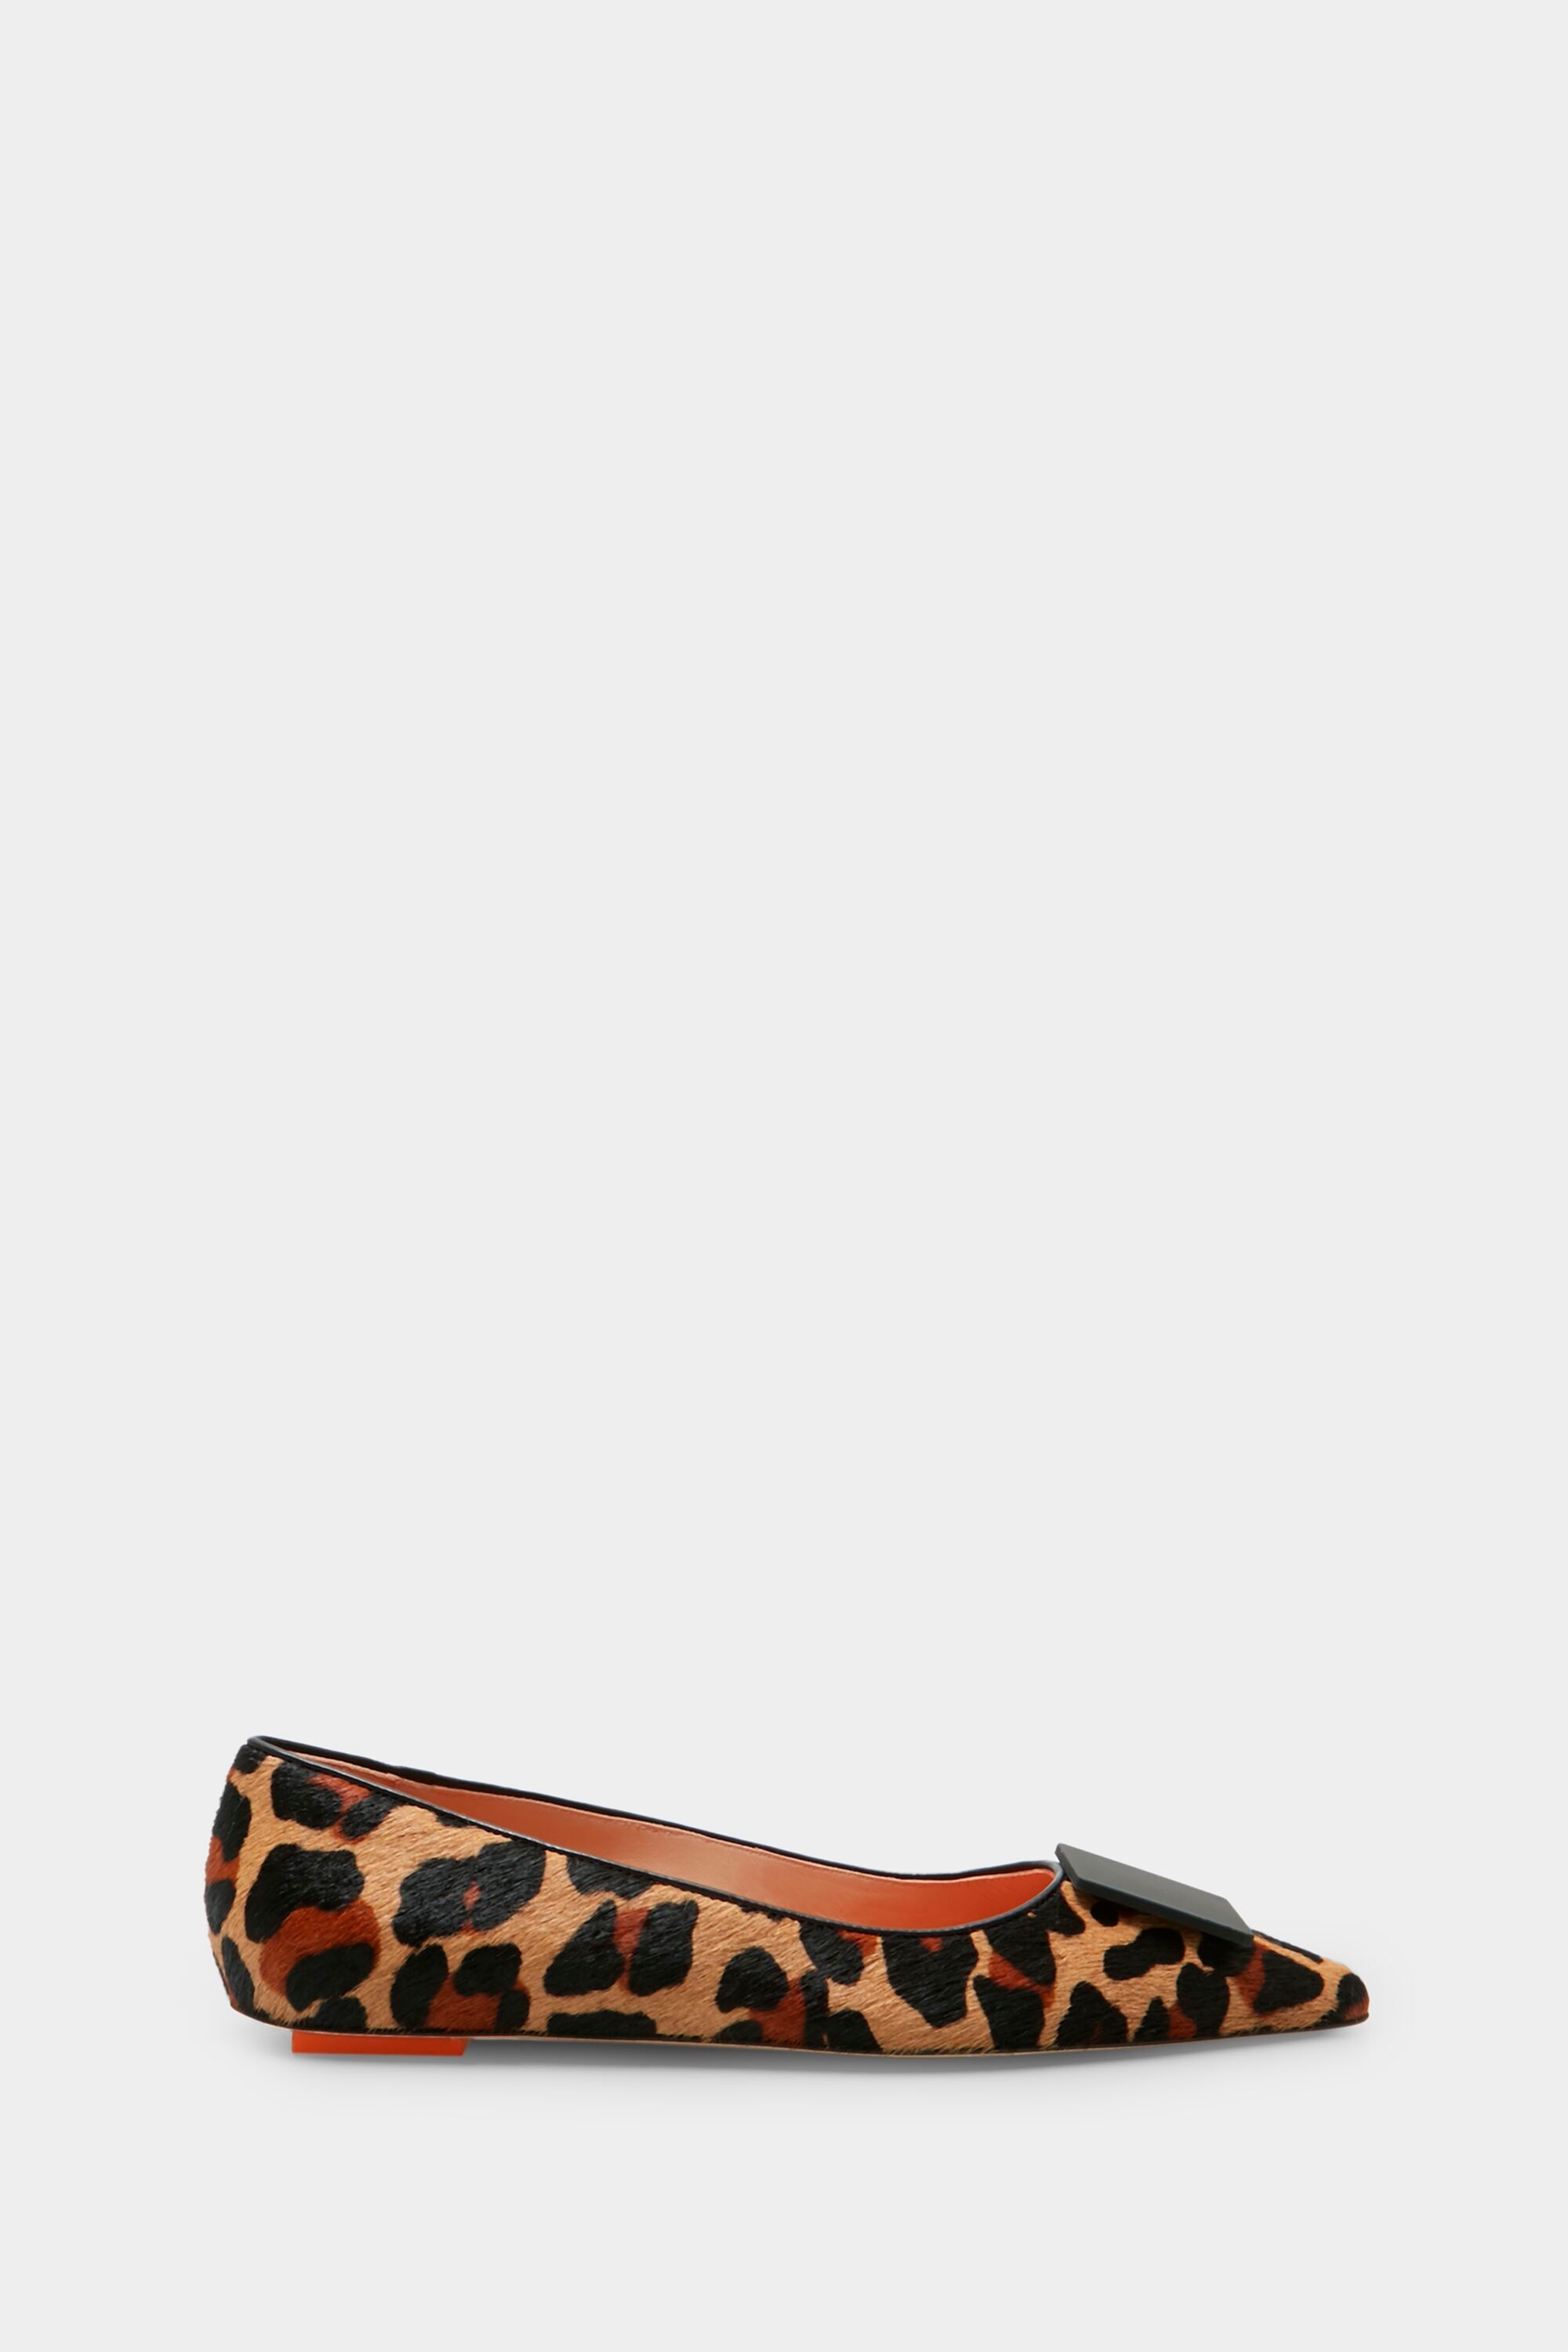 Printed leather flat shoes